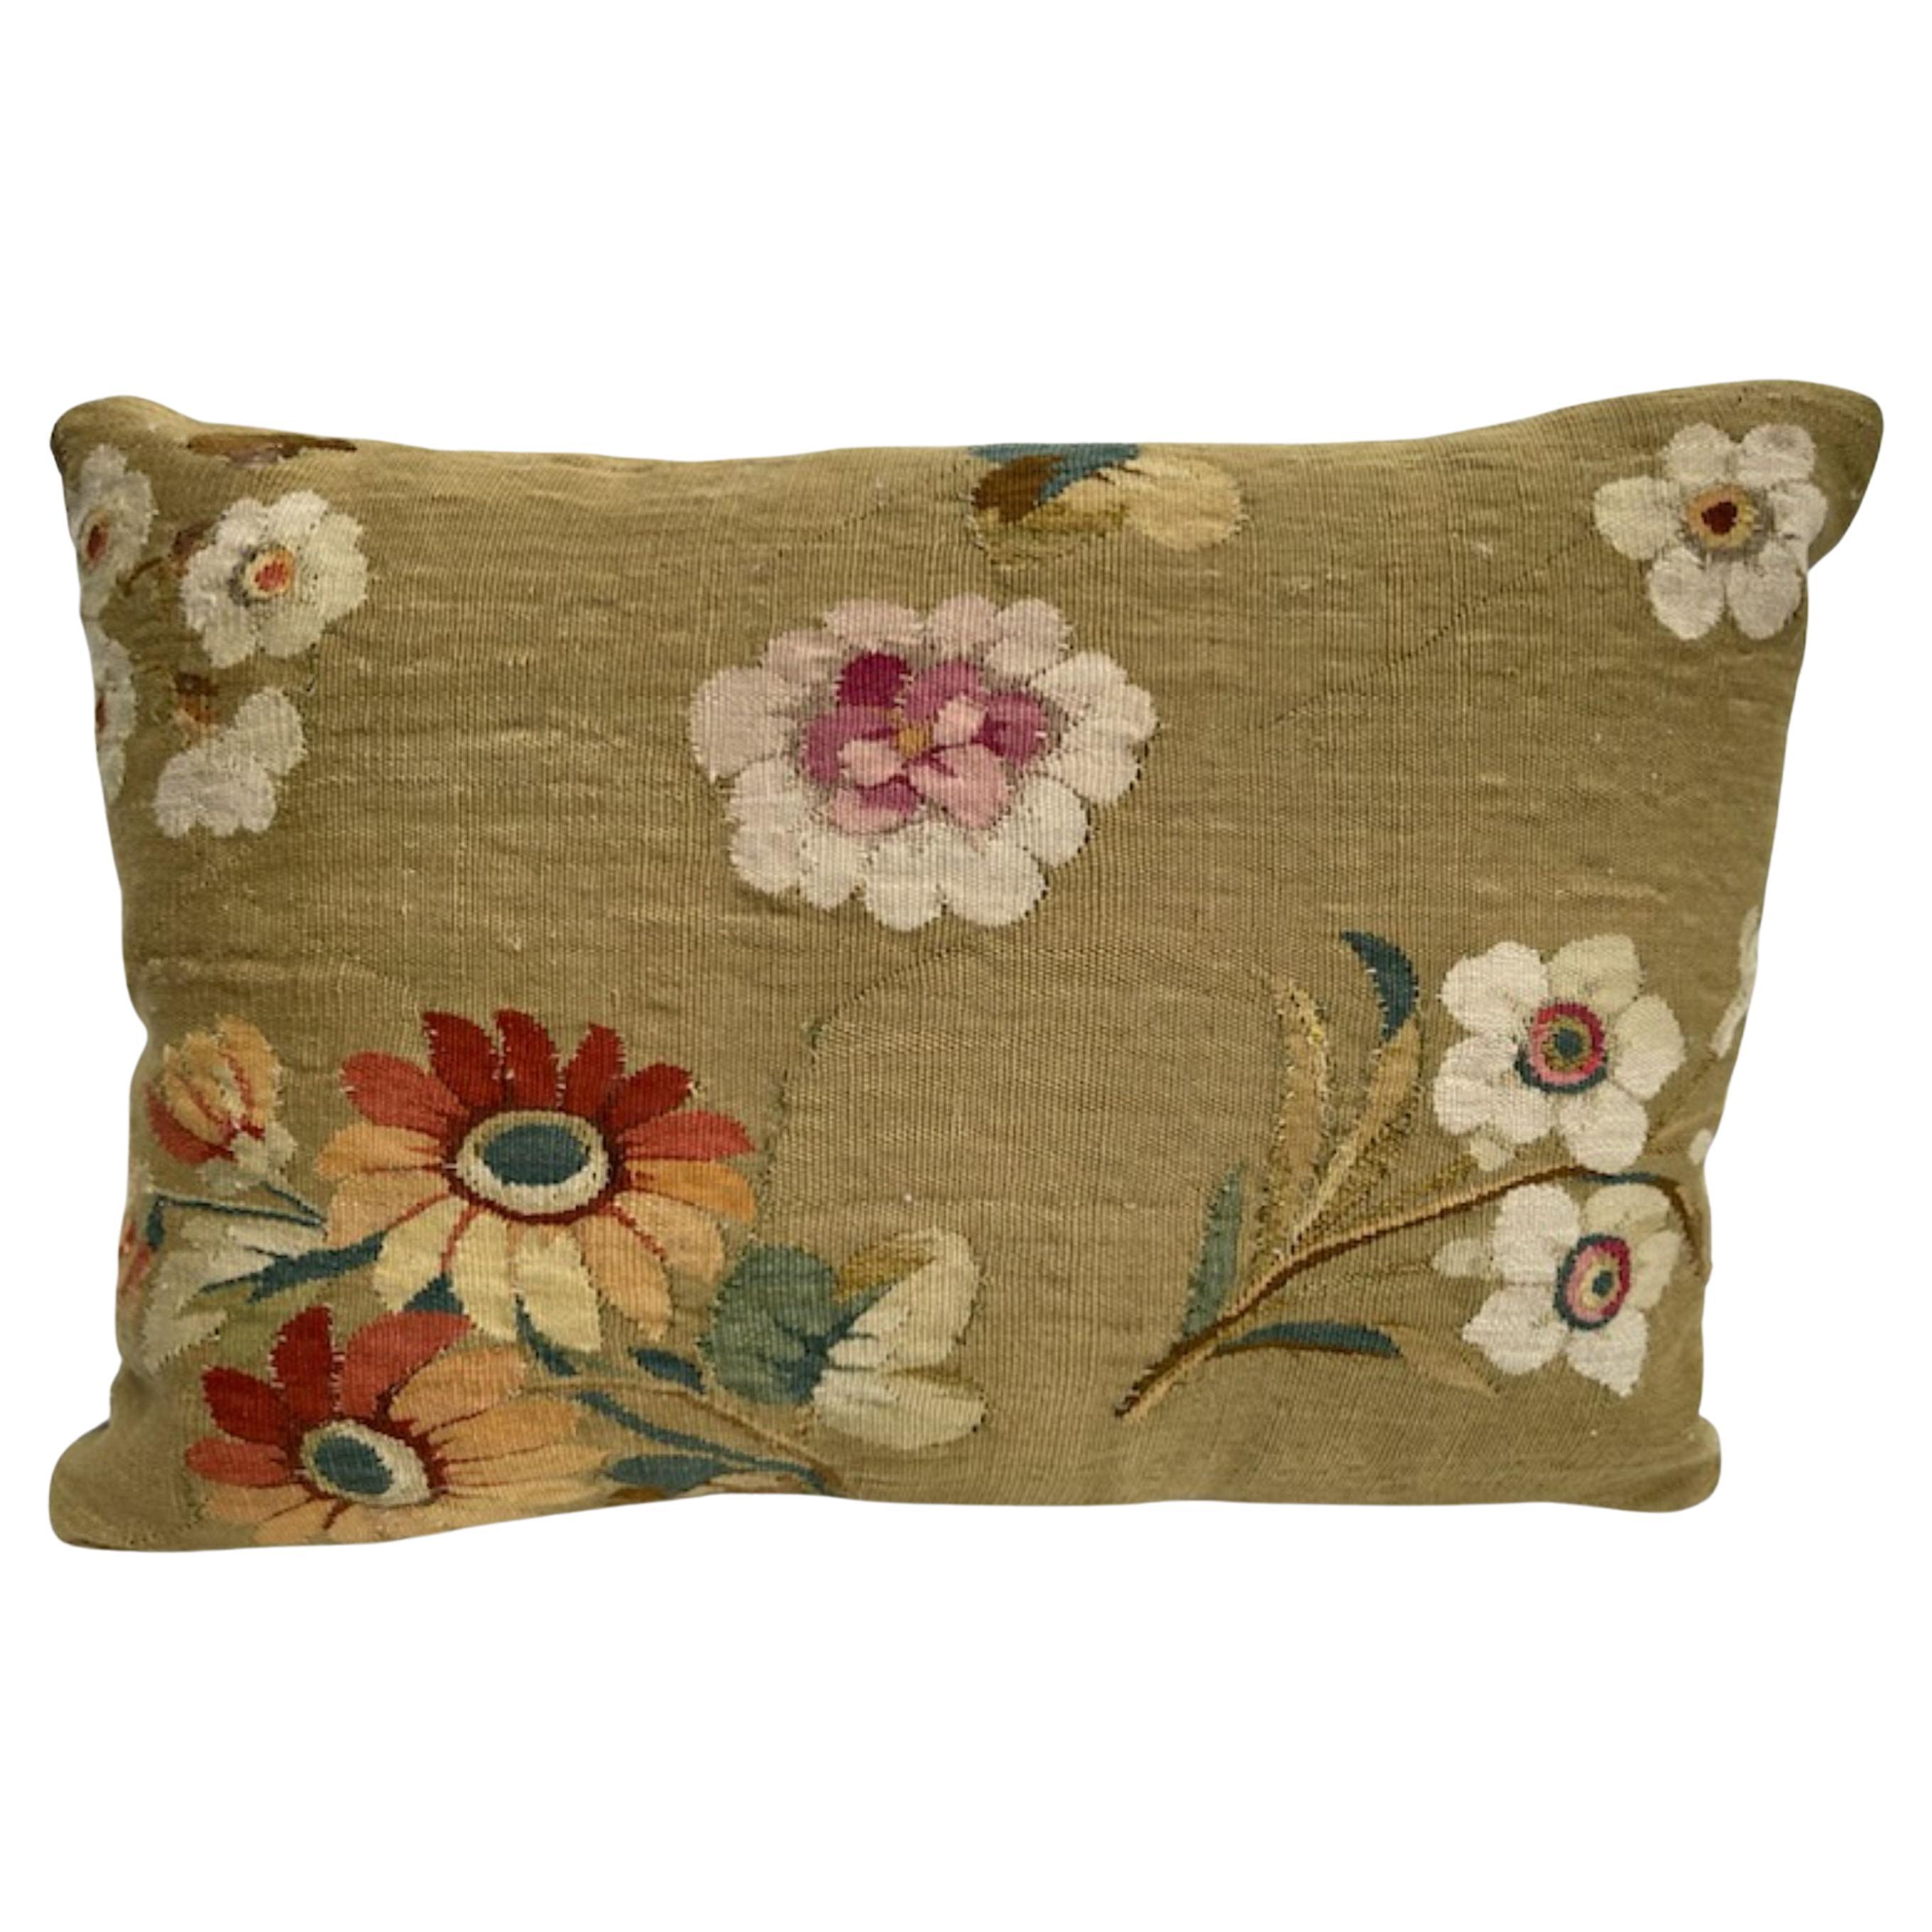 Mid 18th Century French Aubusson Tapestry Pillow